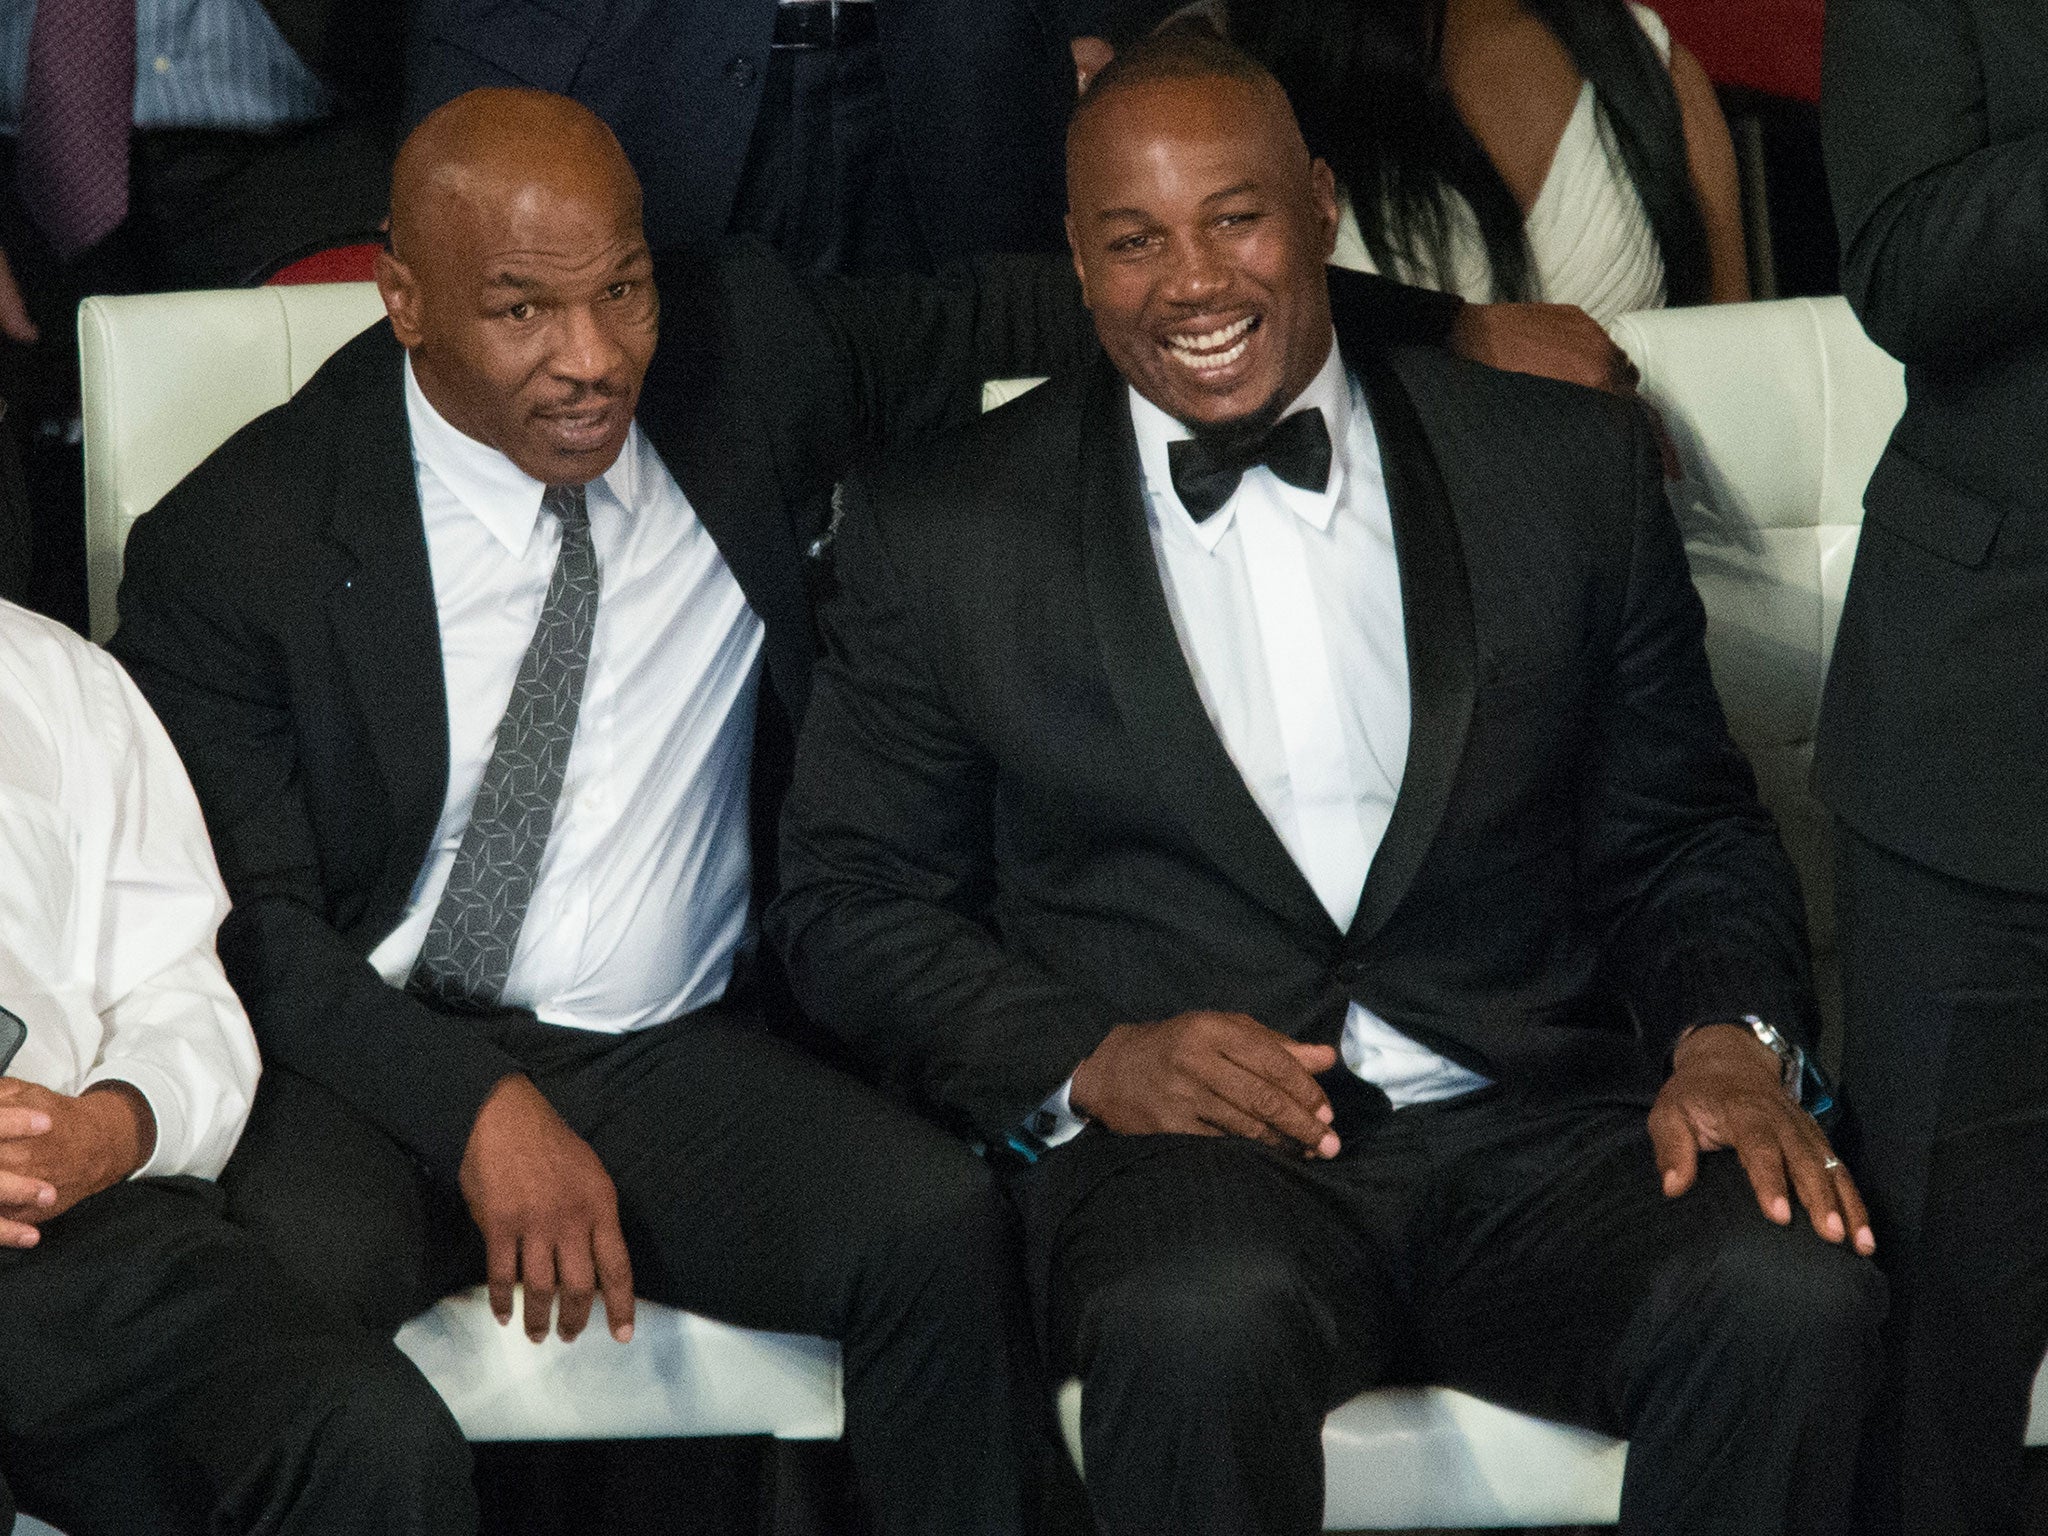 Former boxing heavyweight champions Mike Tyson and Lennox Lewis